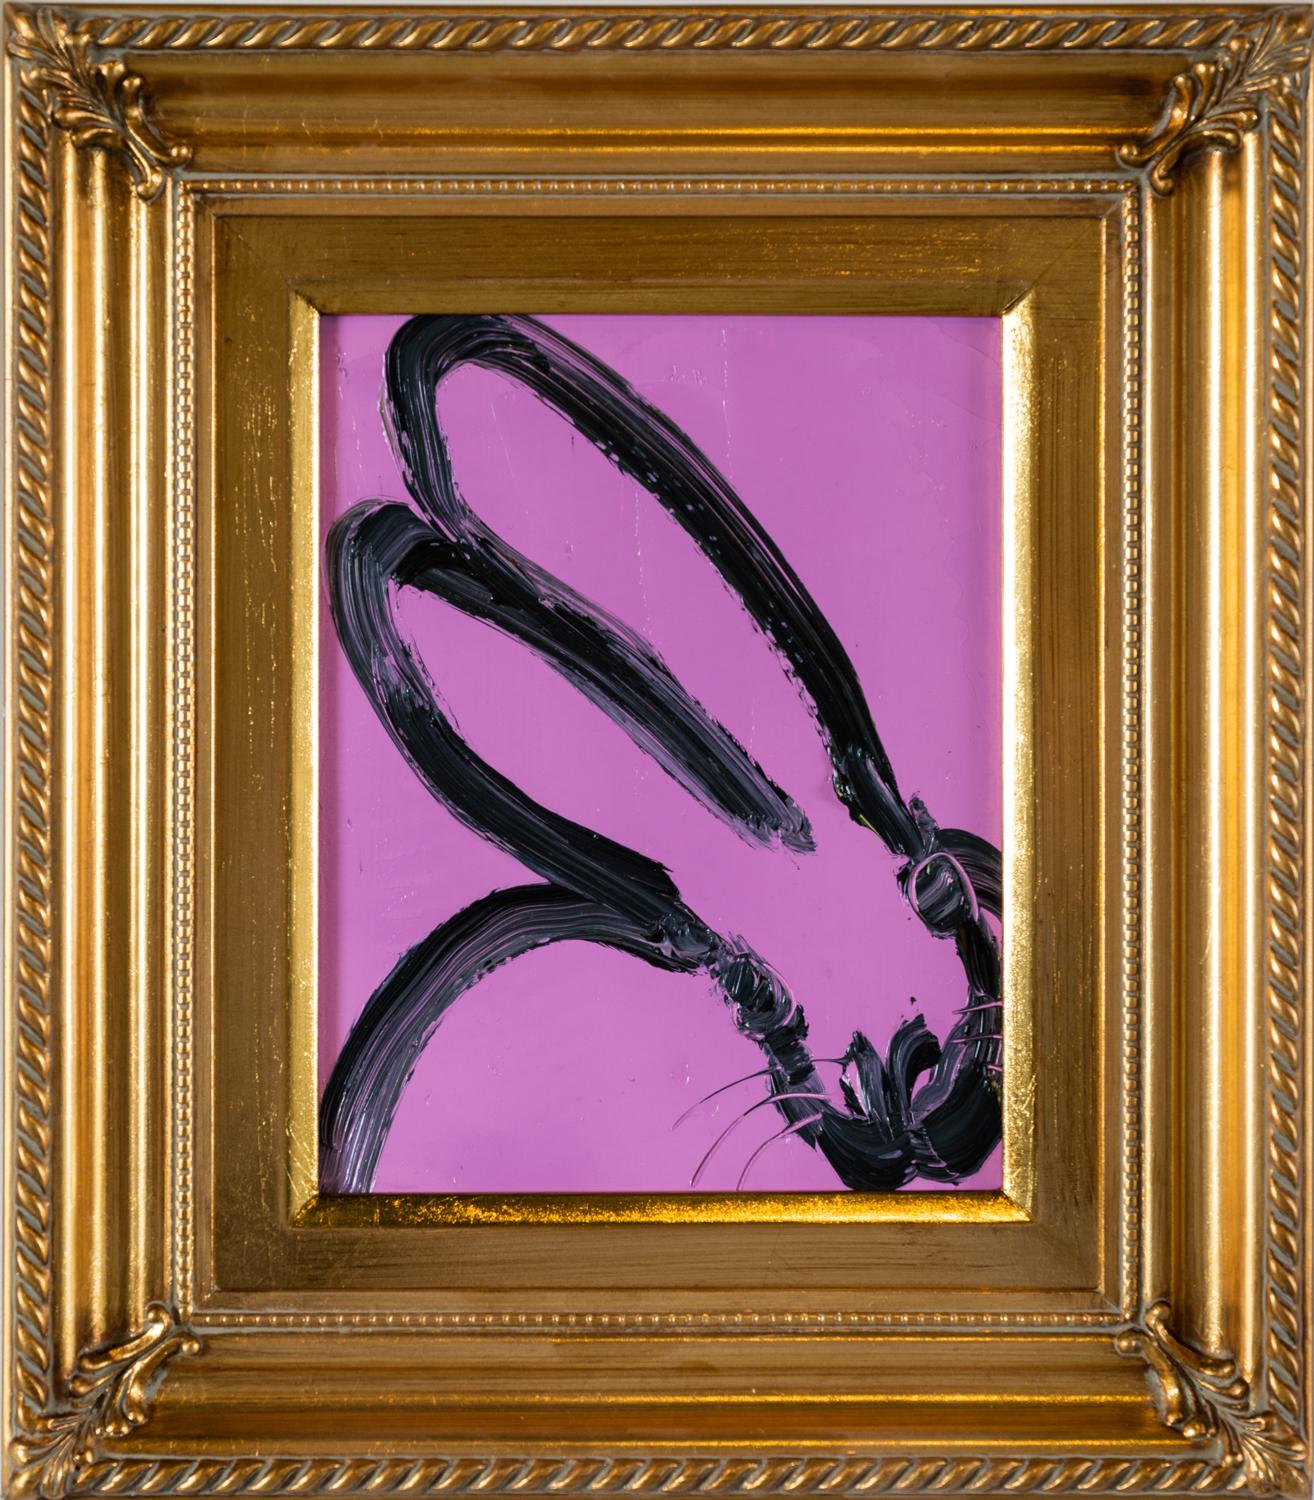 Available at Madelyn Jordon Fine Art. Hunt Slonem's bunny oil painting 'Profile' 2022. Oil on wood, 10 x 8 in. / Frame: 16.25 x 14.25 in. This painting features Slonem's signature bunny outlined in black over a purple background. Framed in a